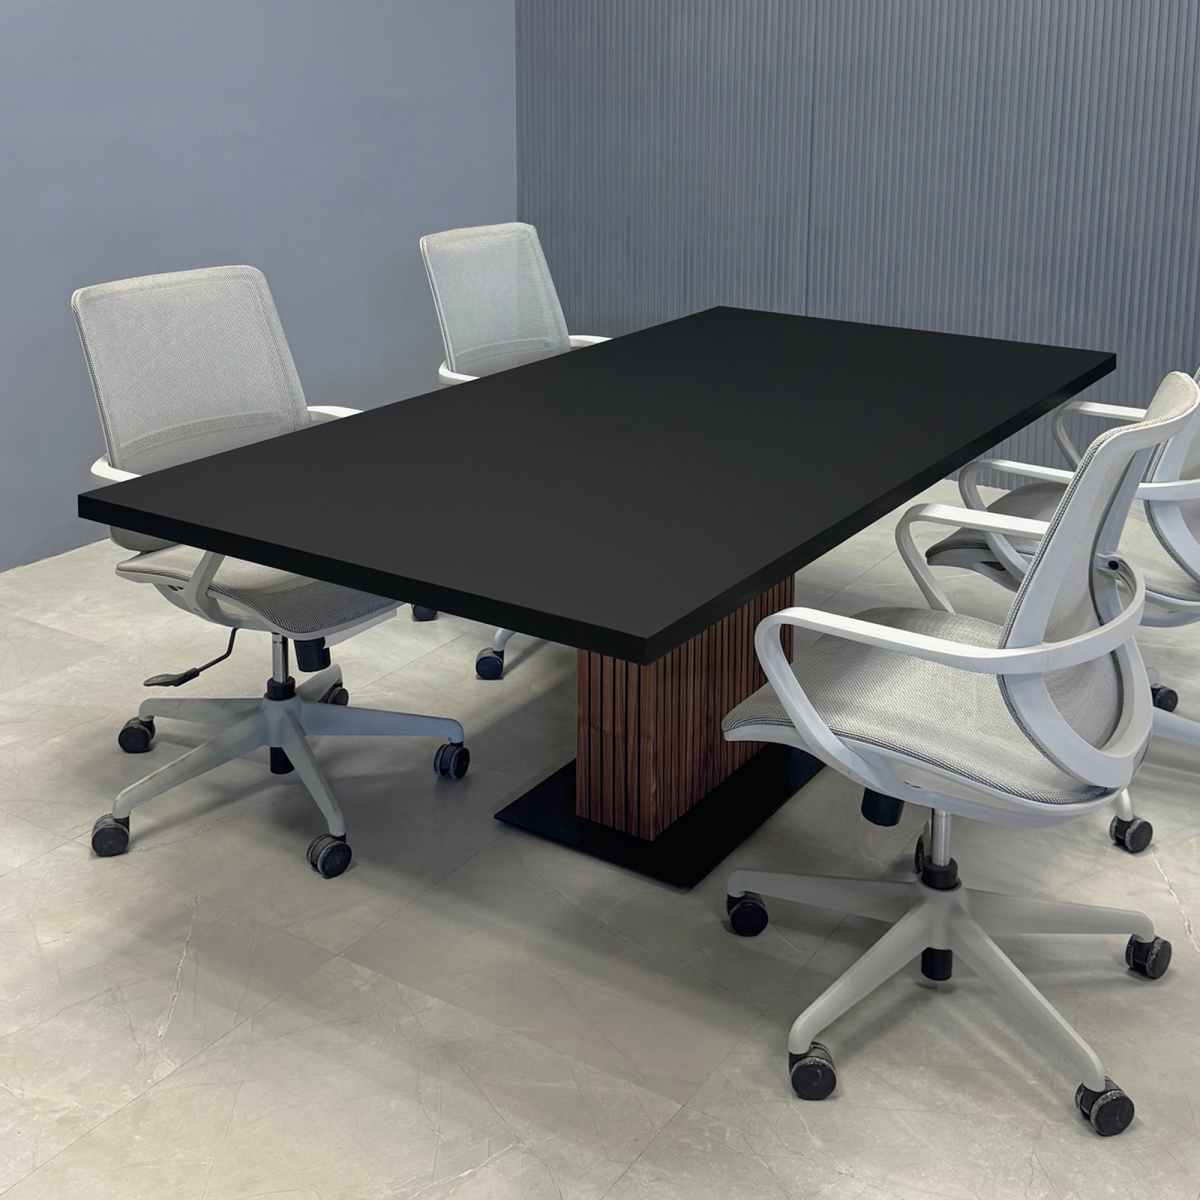 Newton Rectangular Conference Table in Black Traceless Laminate Top - 76 In. - Stock #77